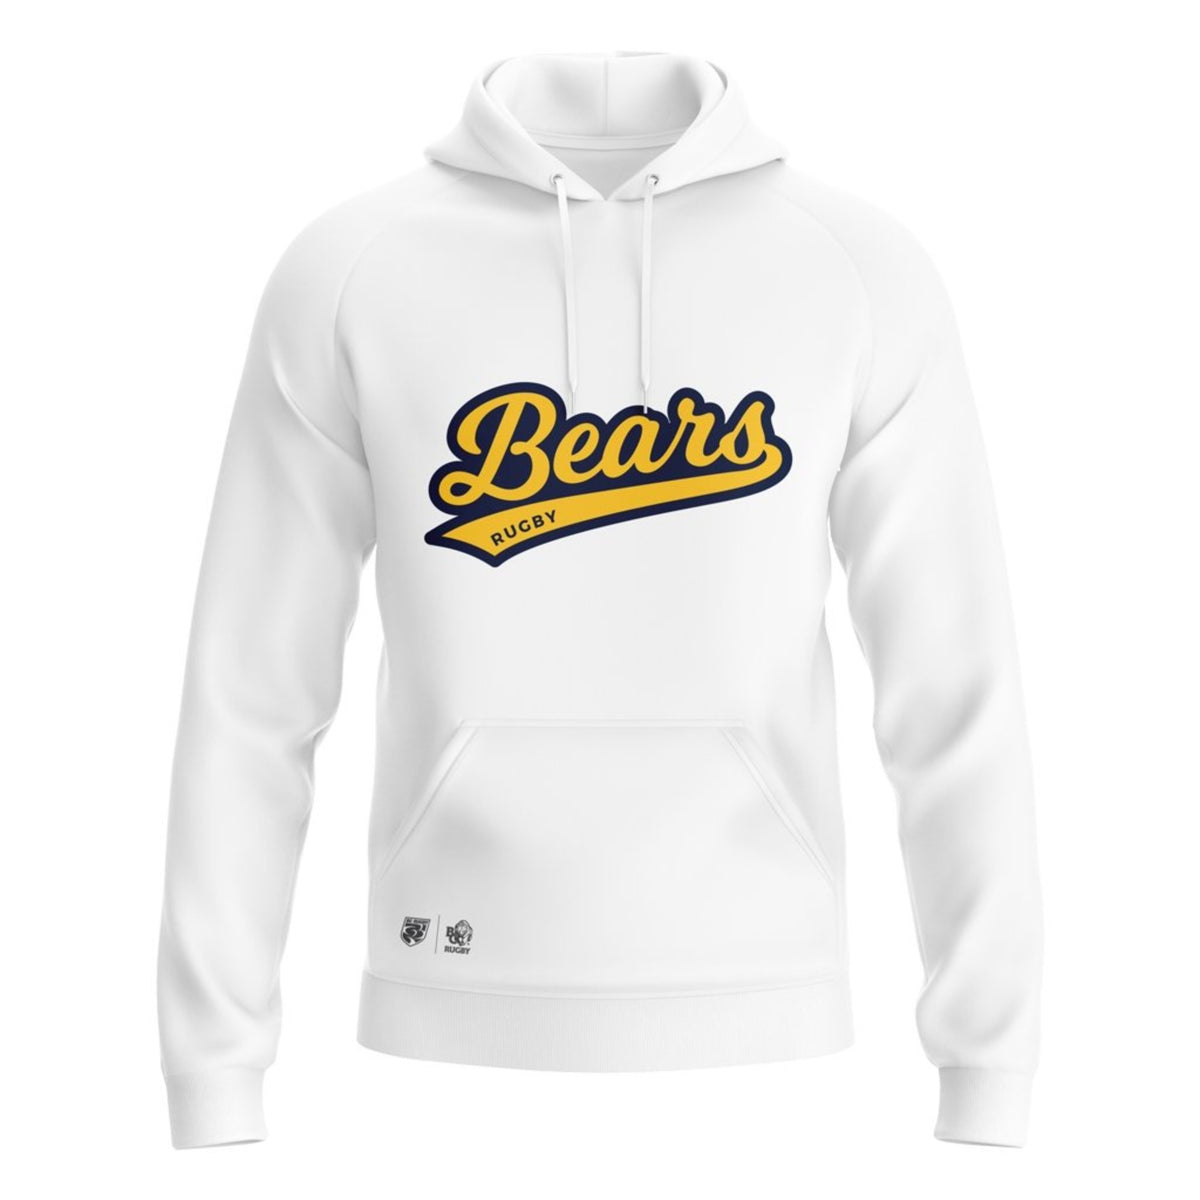 BC Rugby 2021 &quot;Bears&quot; Hoodie - Adult Unisex - www.therugbyshop.com www.therugbyshop.com ADULT UNISEX / WHITE / S XIX Brands HOODIES BC Rugby 2021 &quot;Bears&quot; Hoodie - Adult Unisex